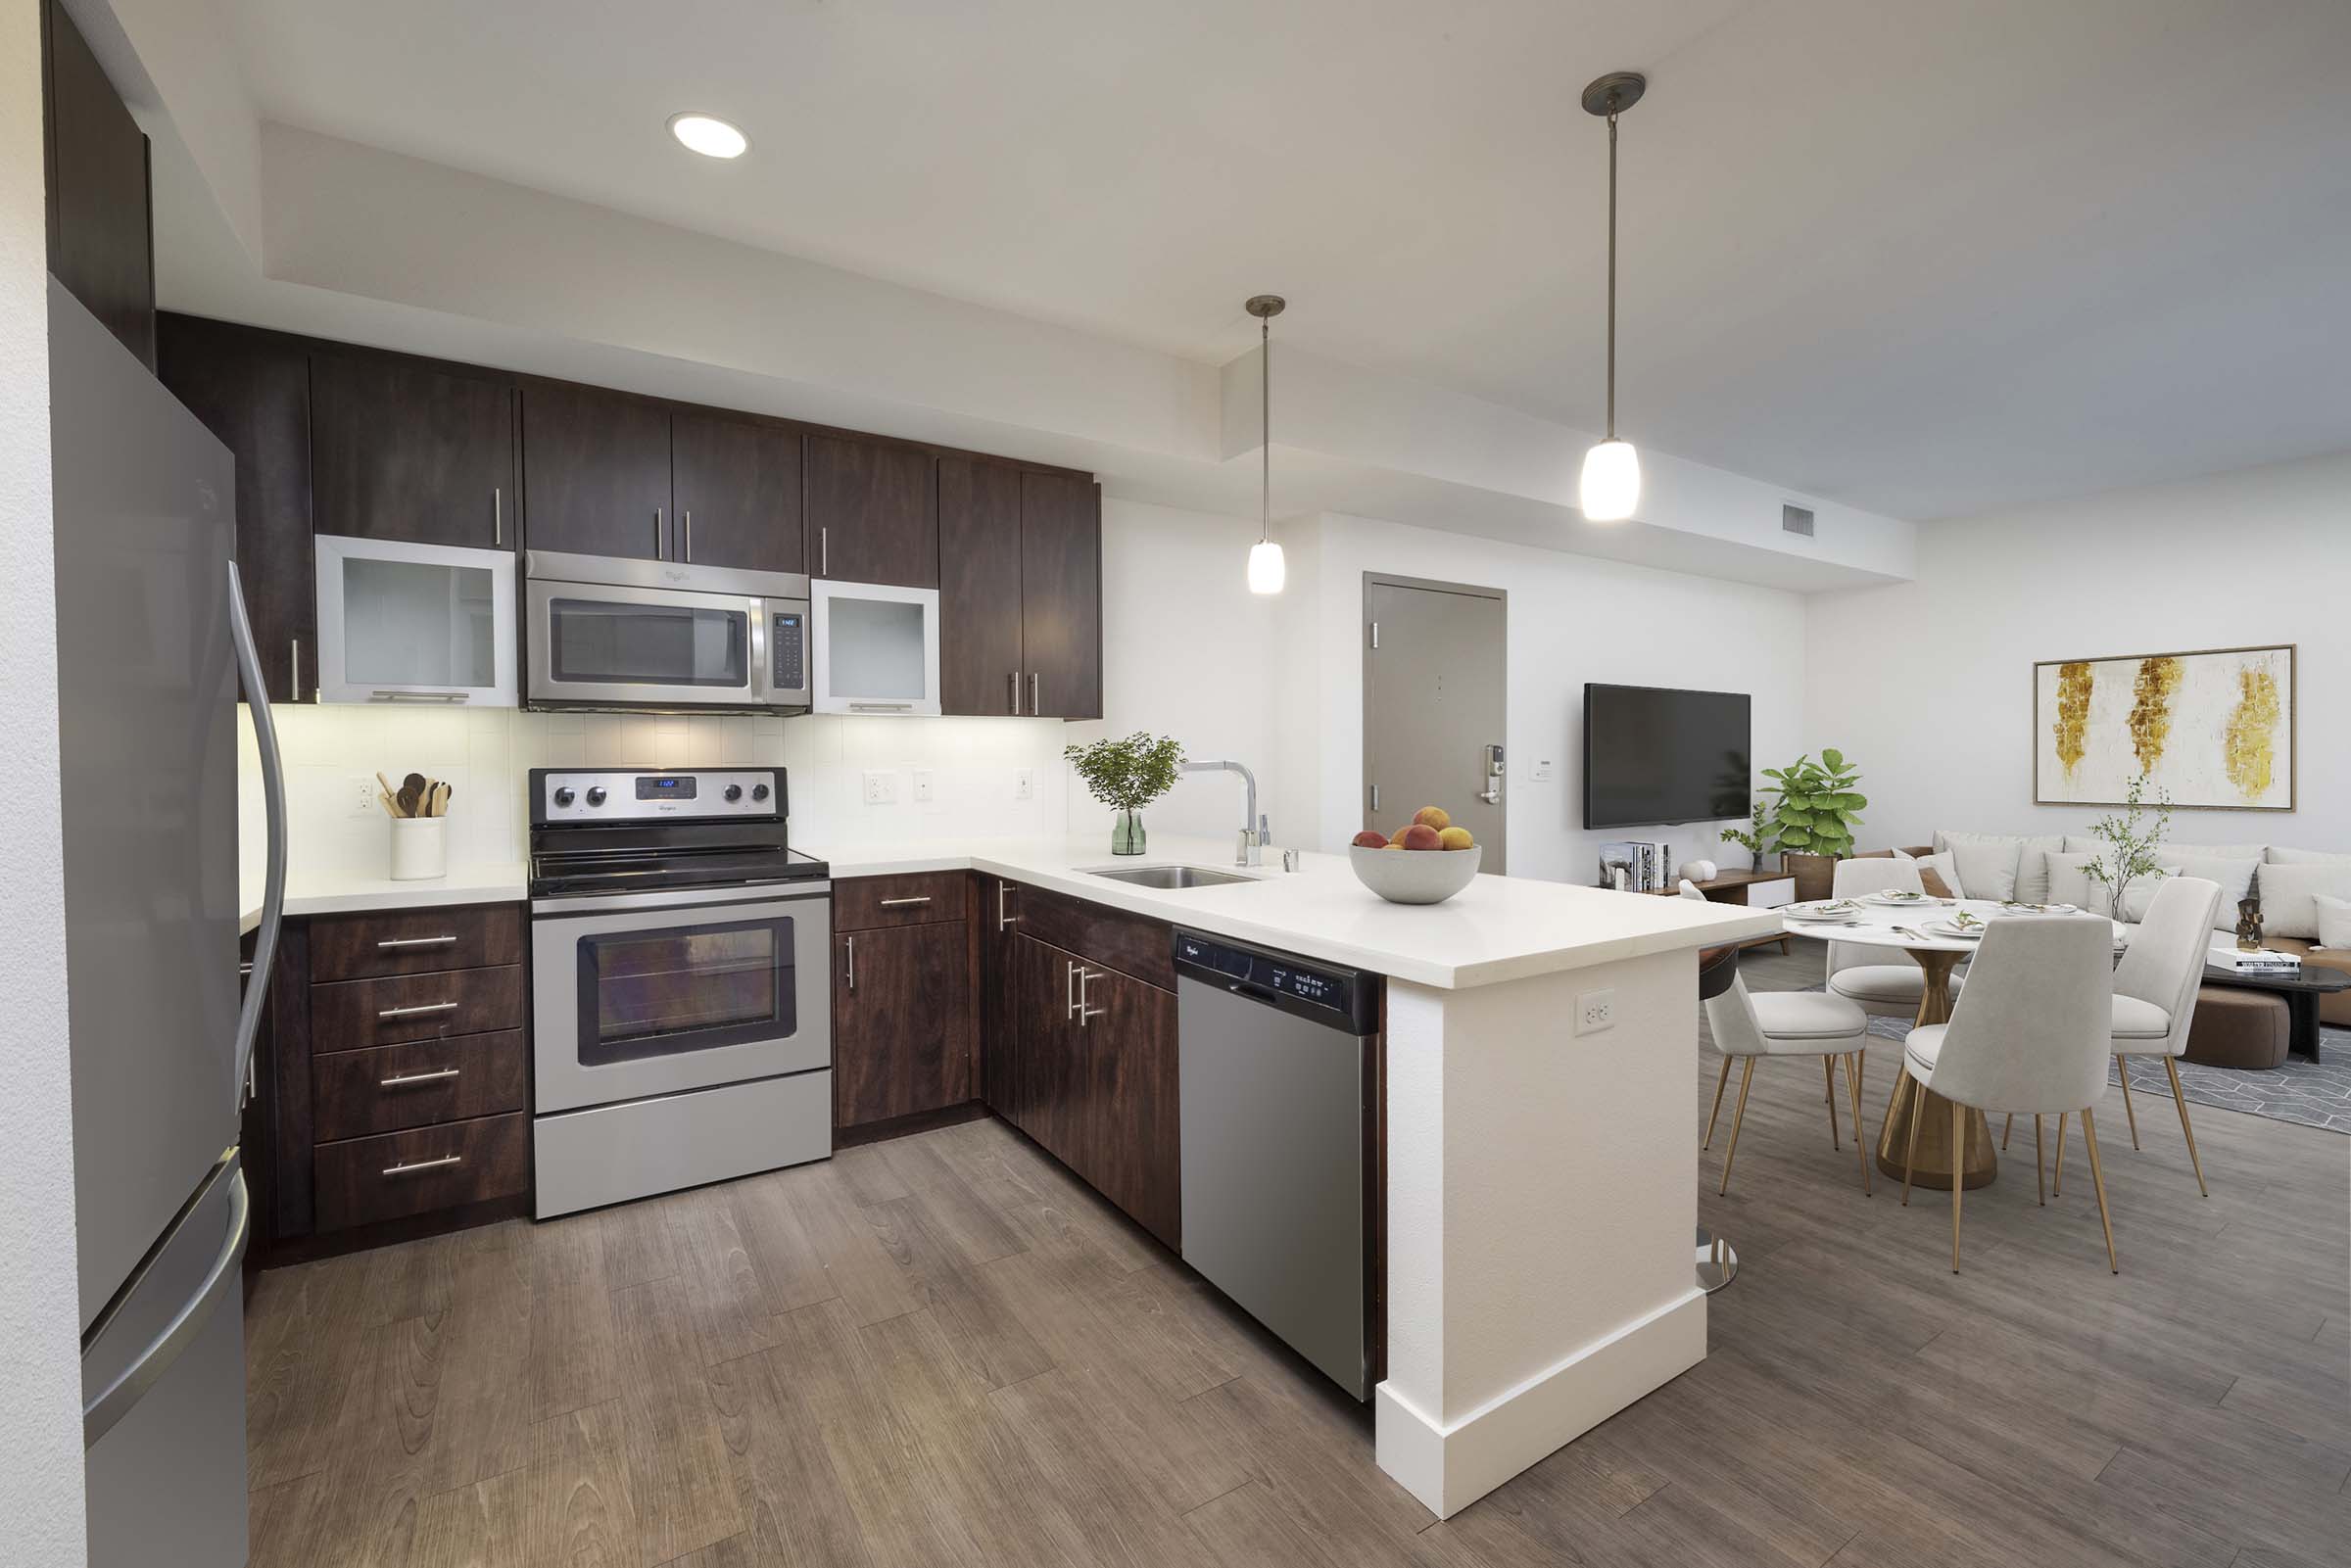 Open concept kitchen with stainless steel appliances and dining area